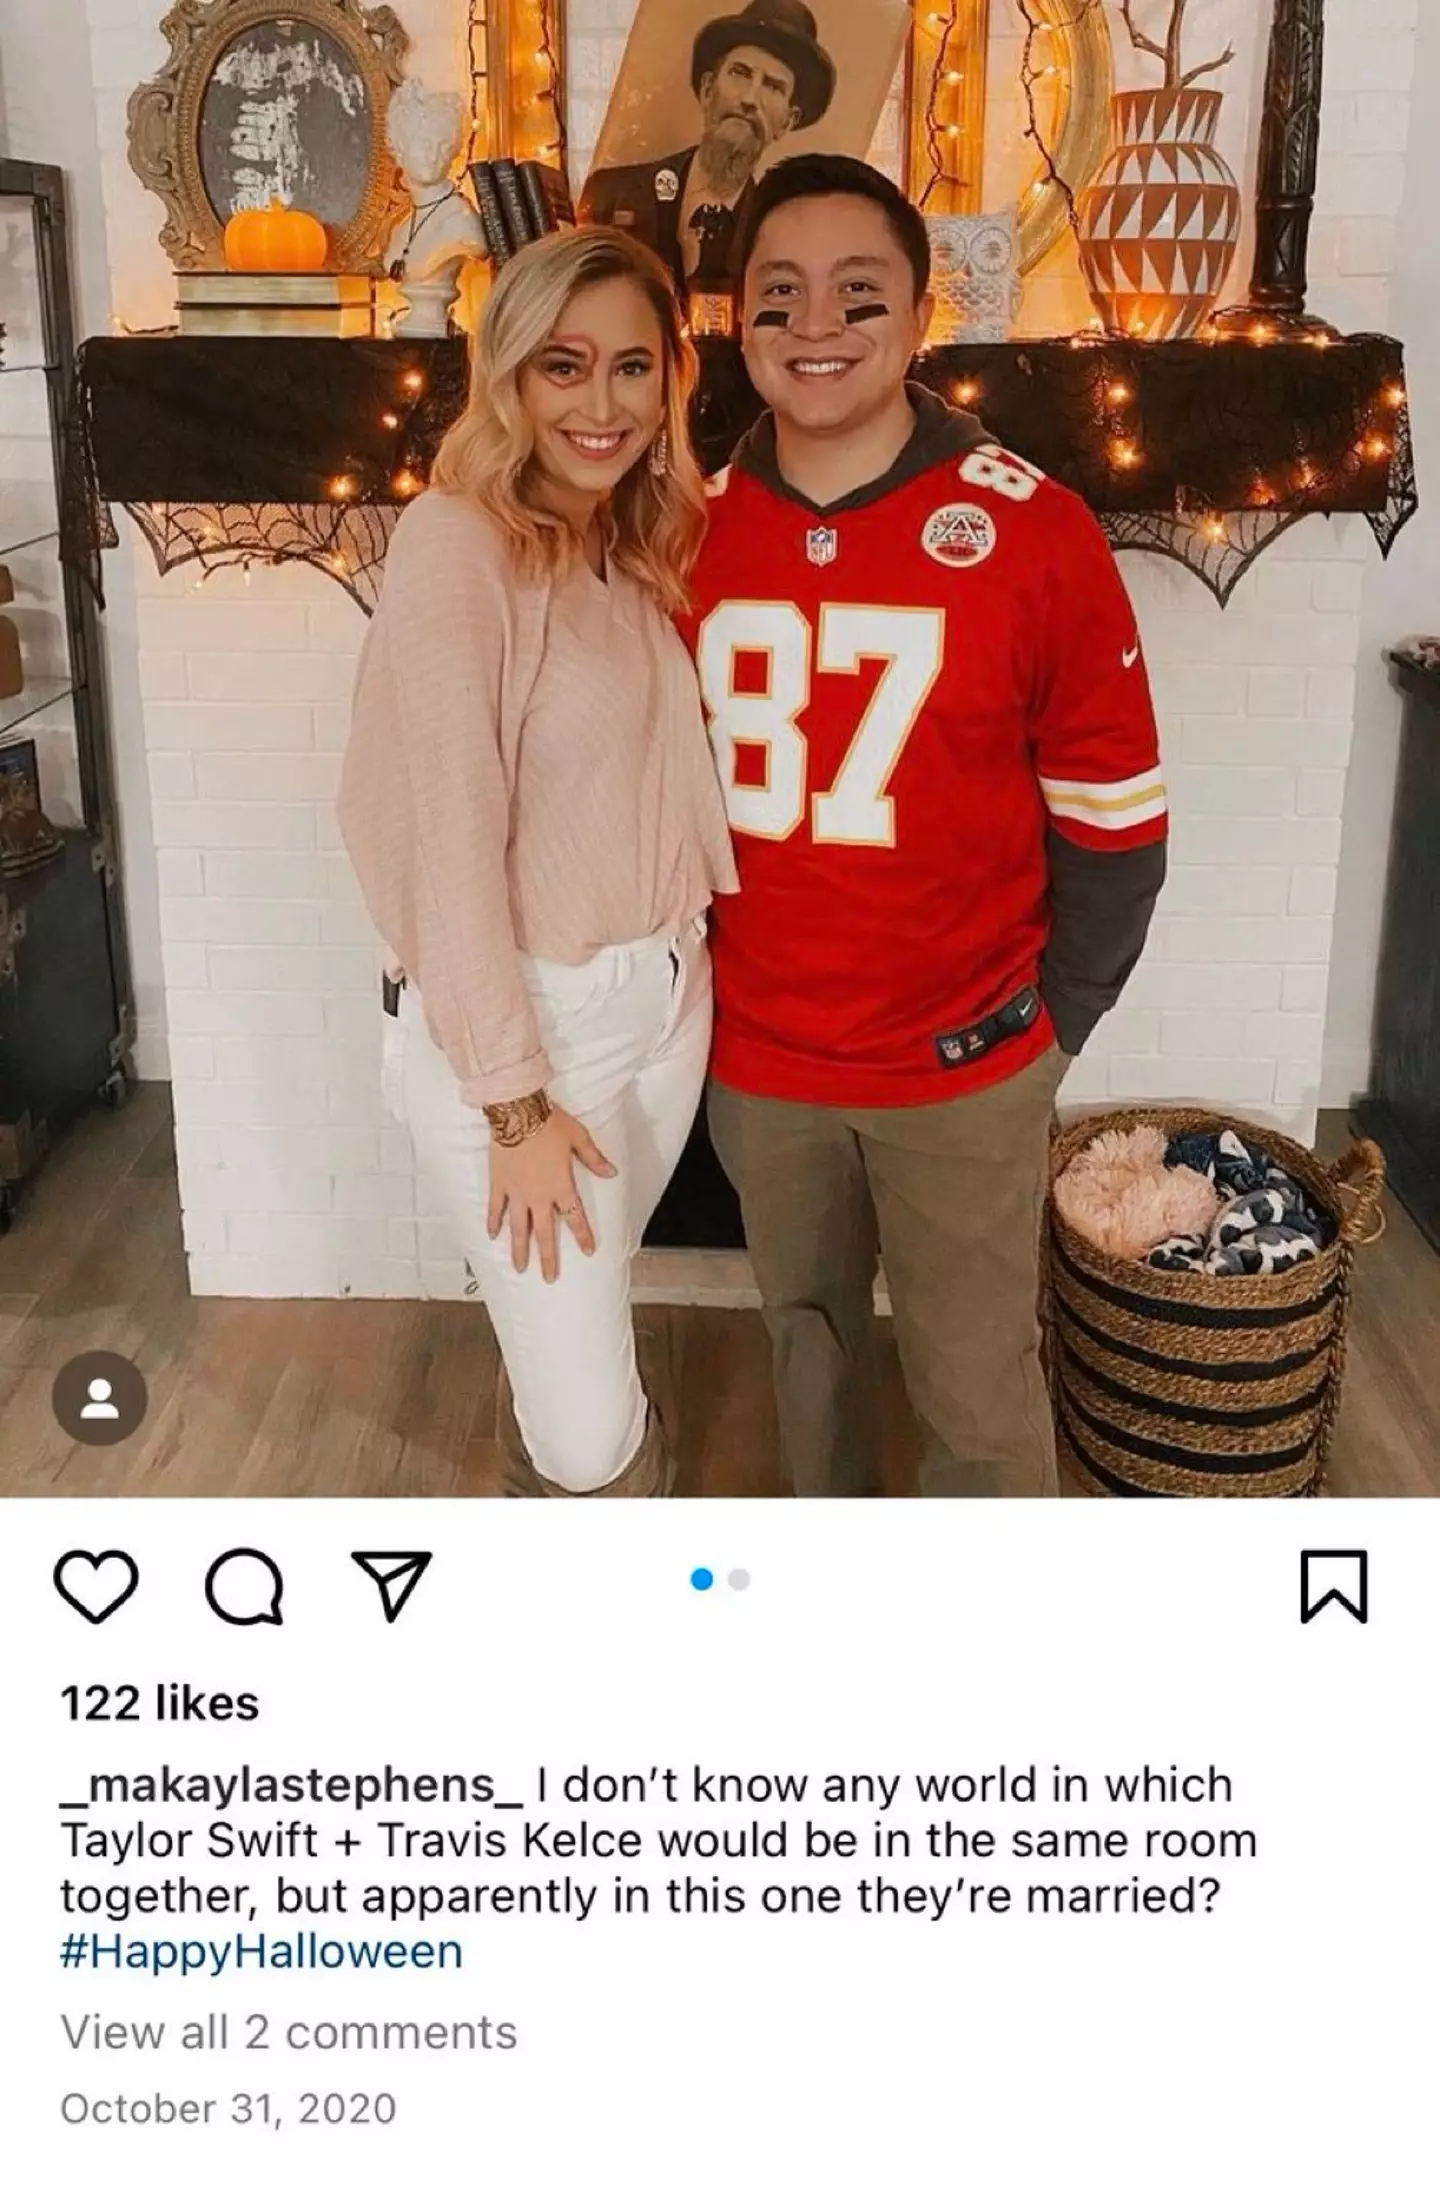 One woman may have unknowingly manifested Taylor Swift and Travis Kelce's rumoured romance.